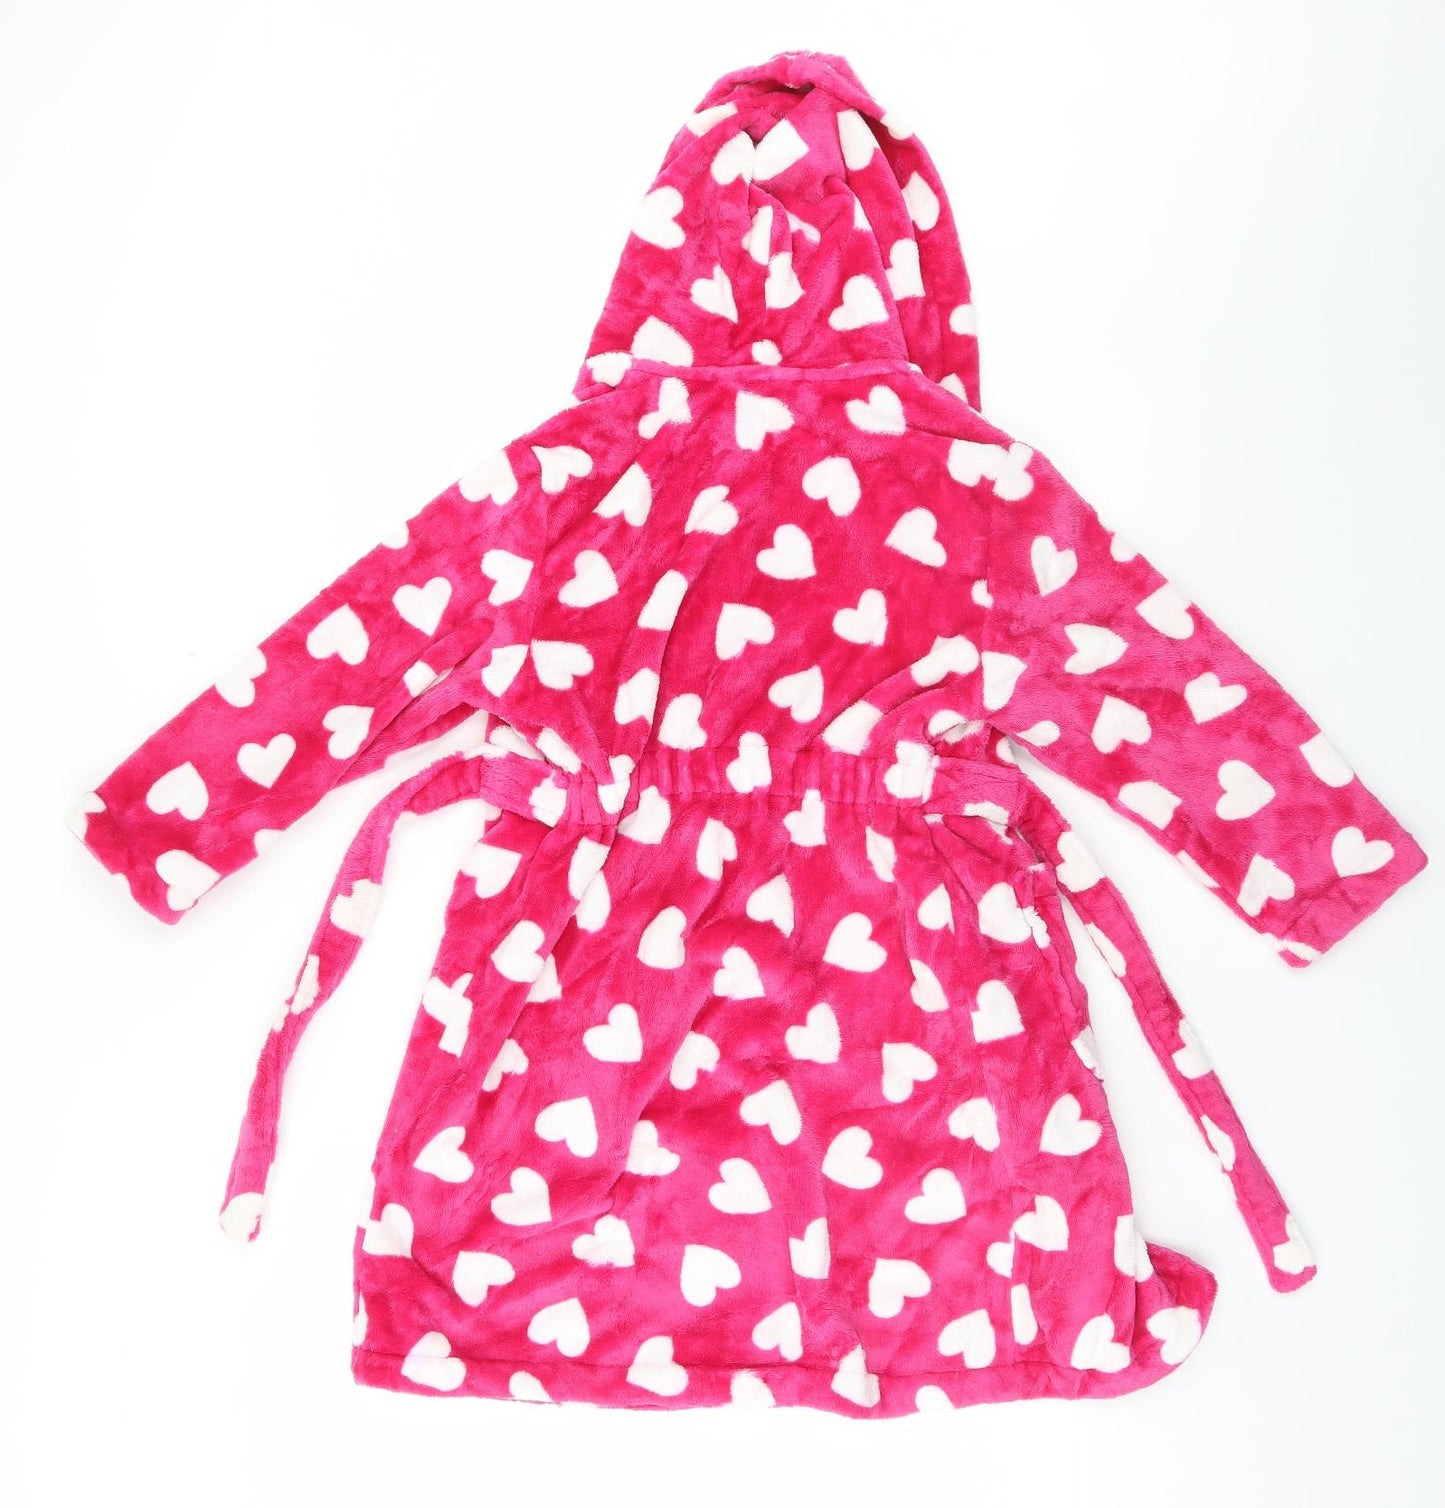 George Girls Pink Geometric   Gown Size 7-8 Years  - Hearts